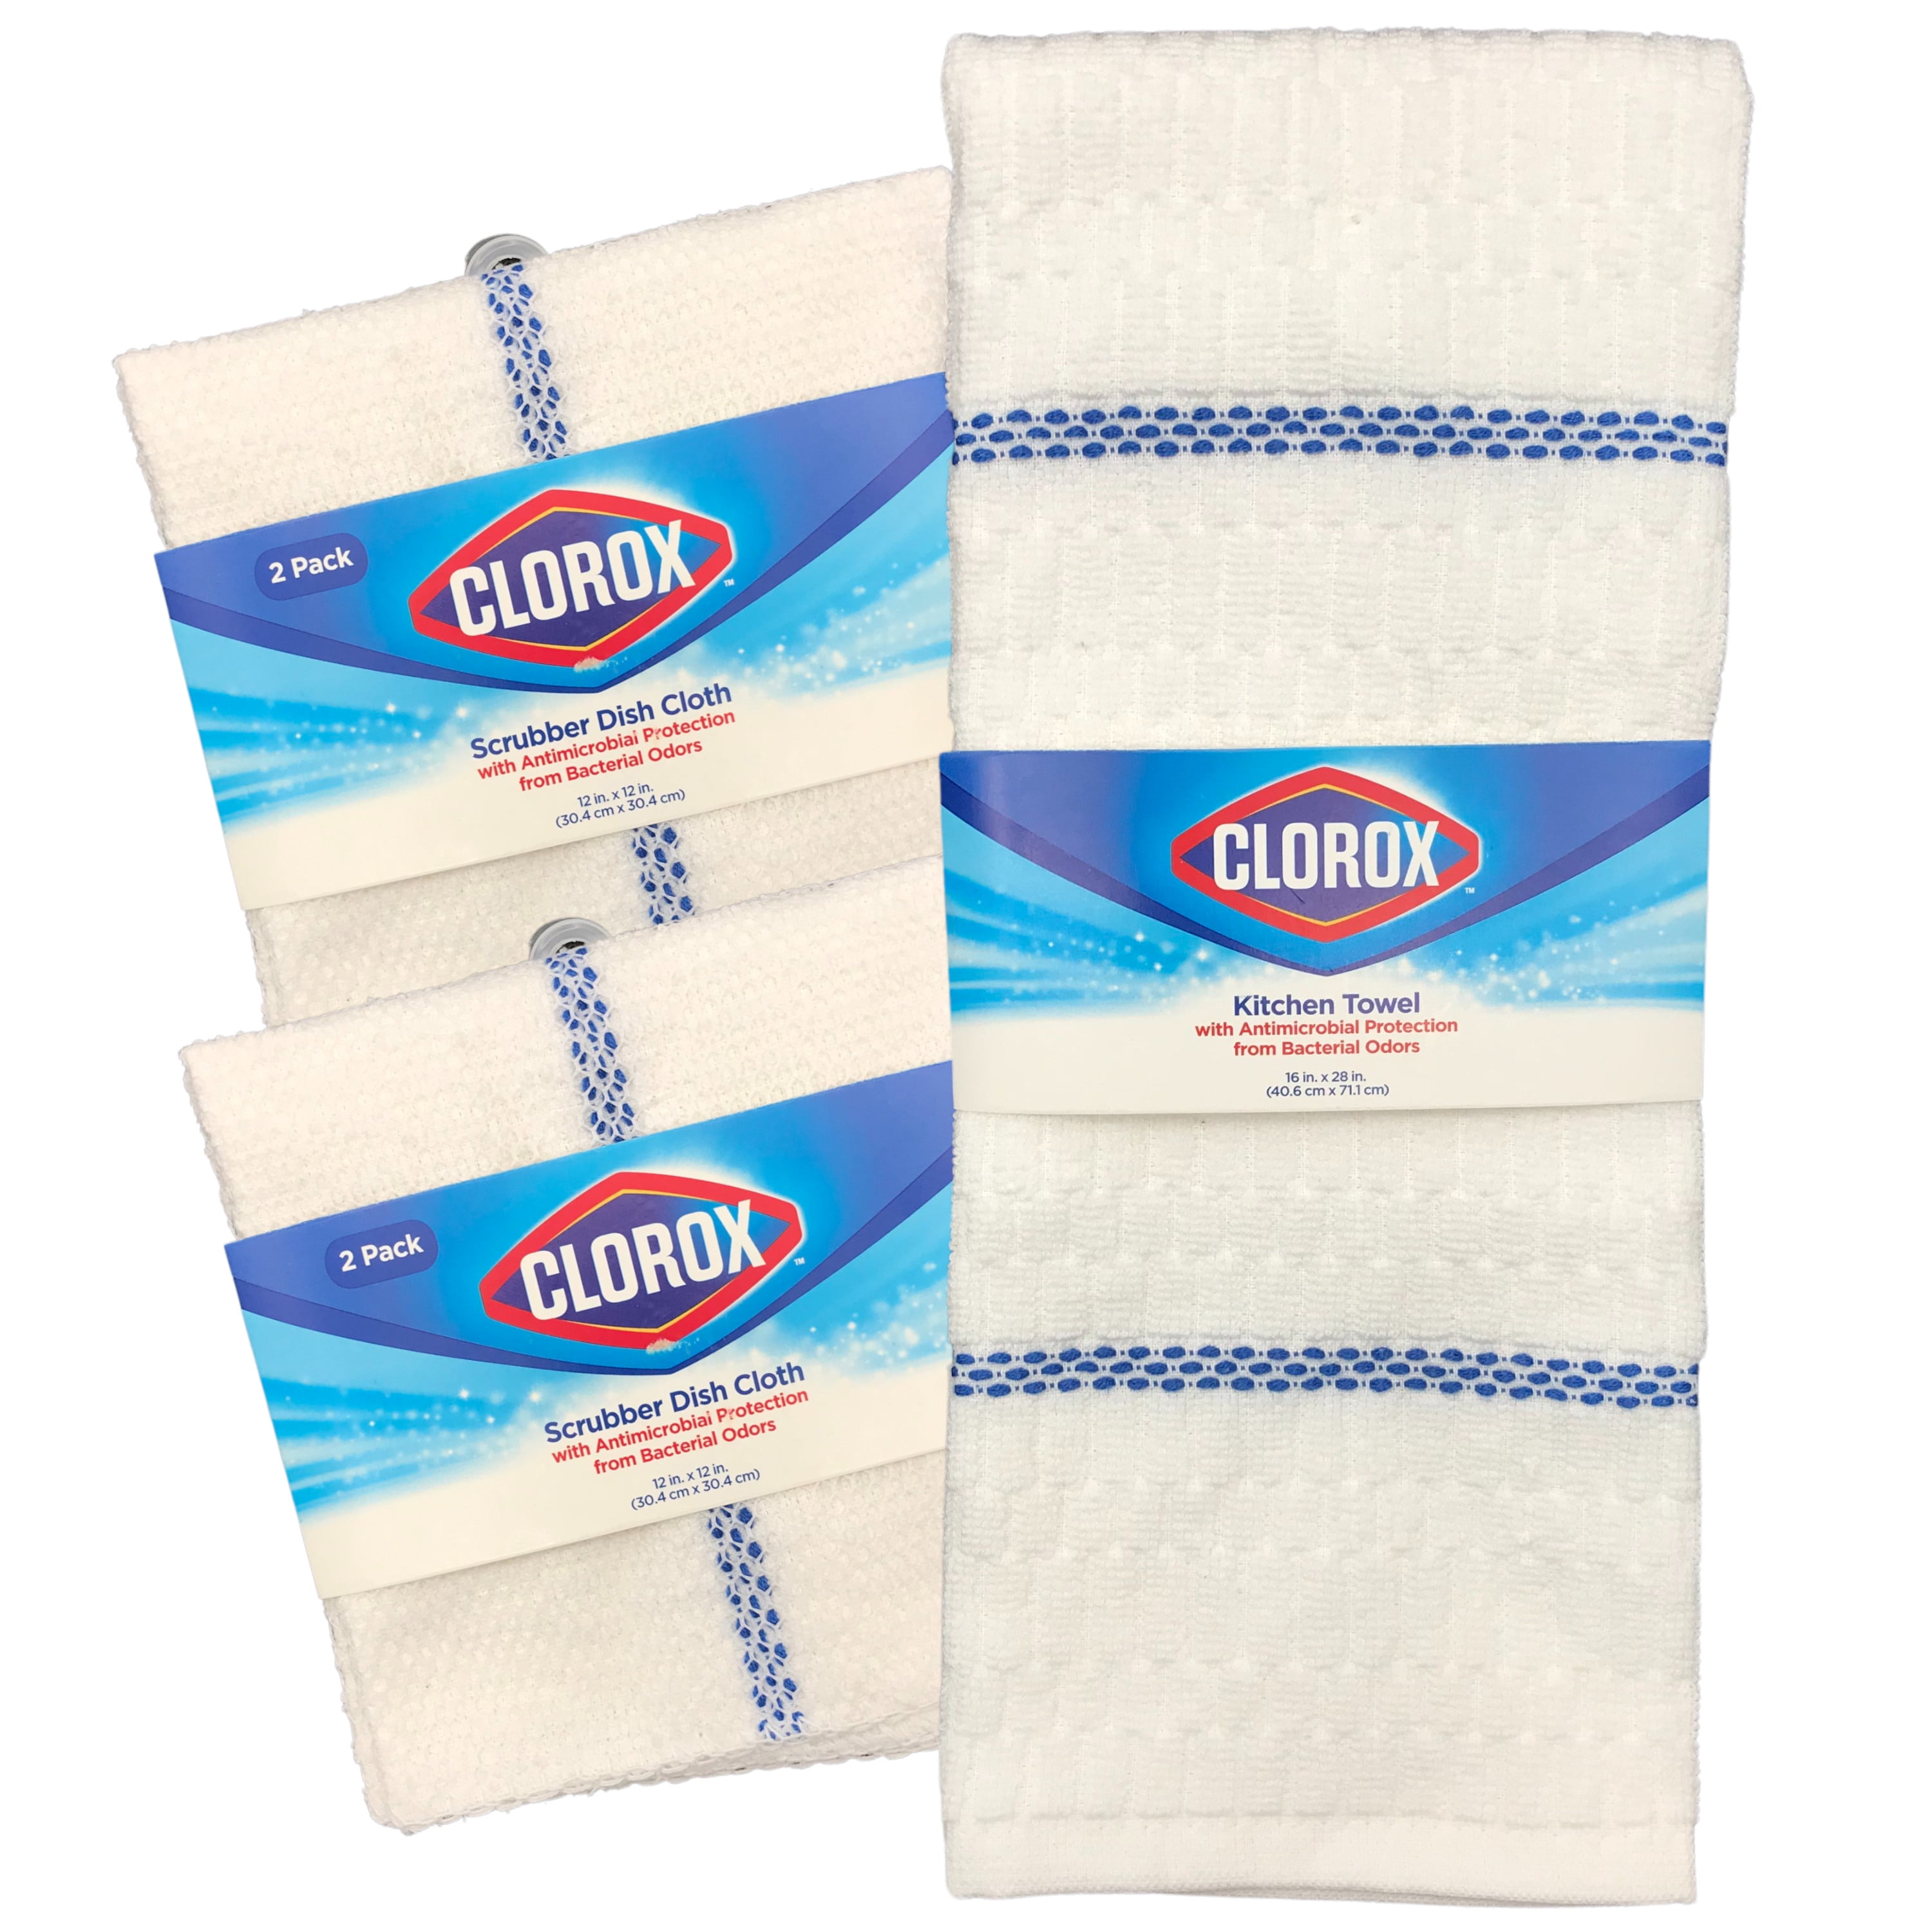 Clorox Dish Cloths - 6 Count (2 Packs of 3 Cloths), White with Grey Stripe